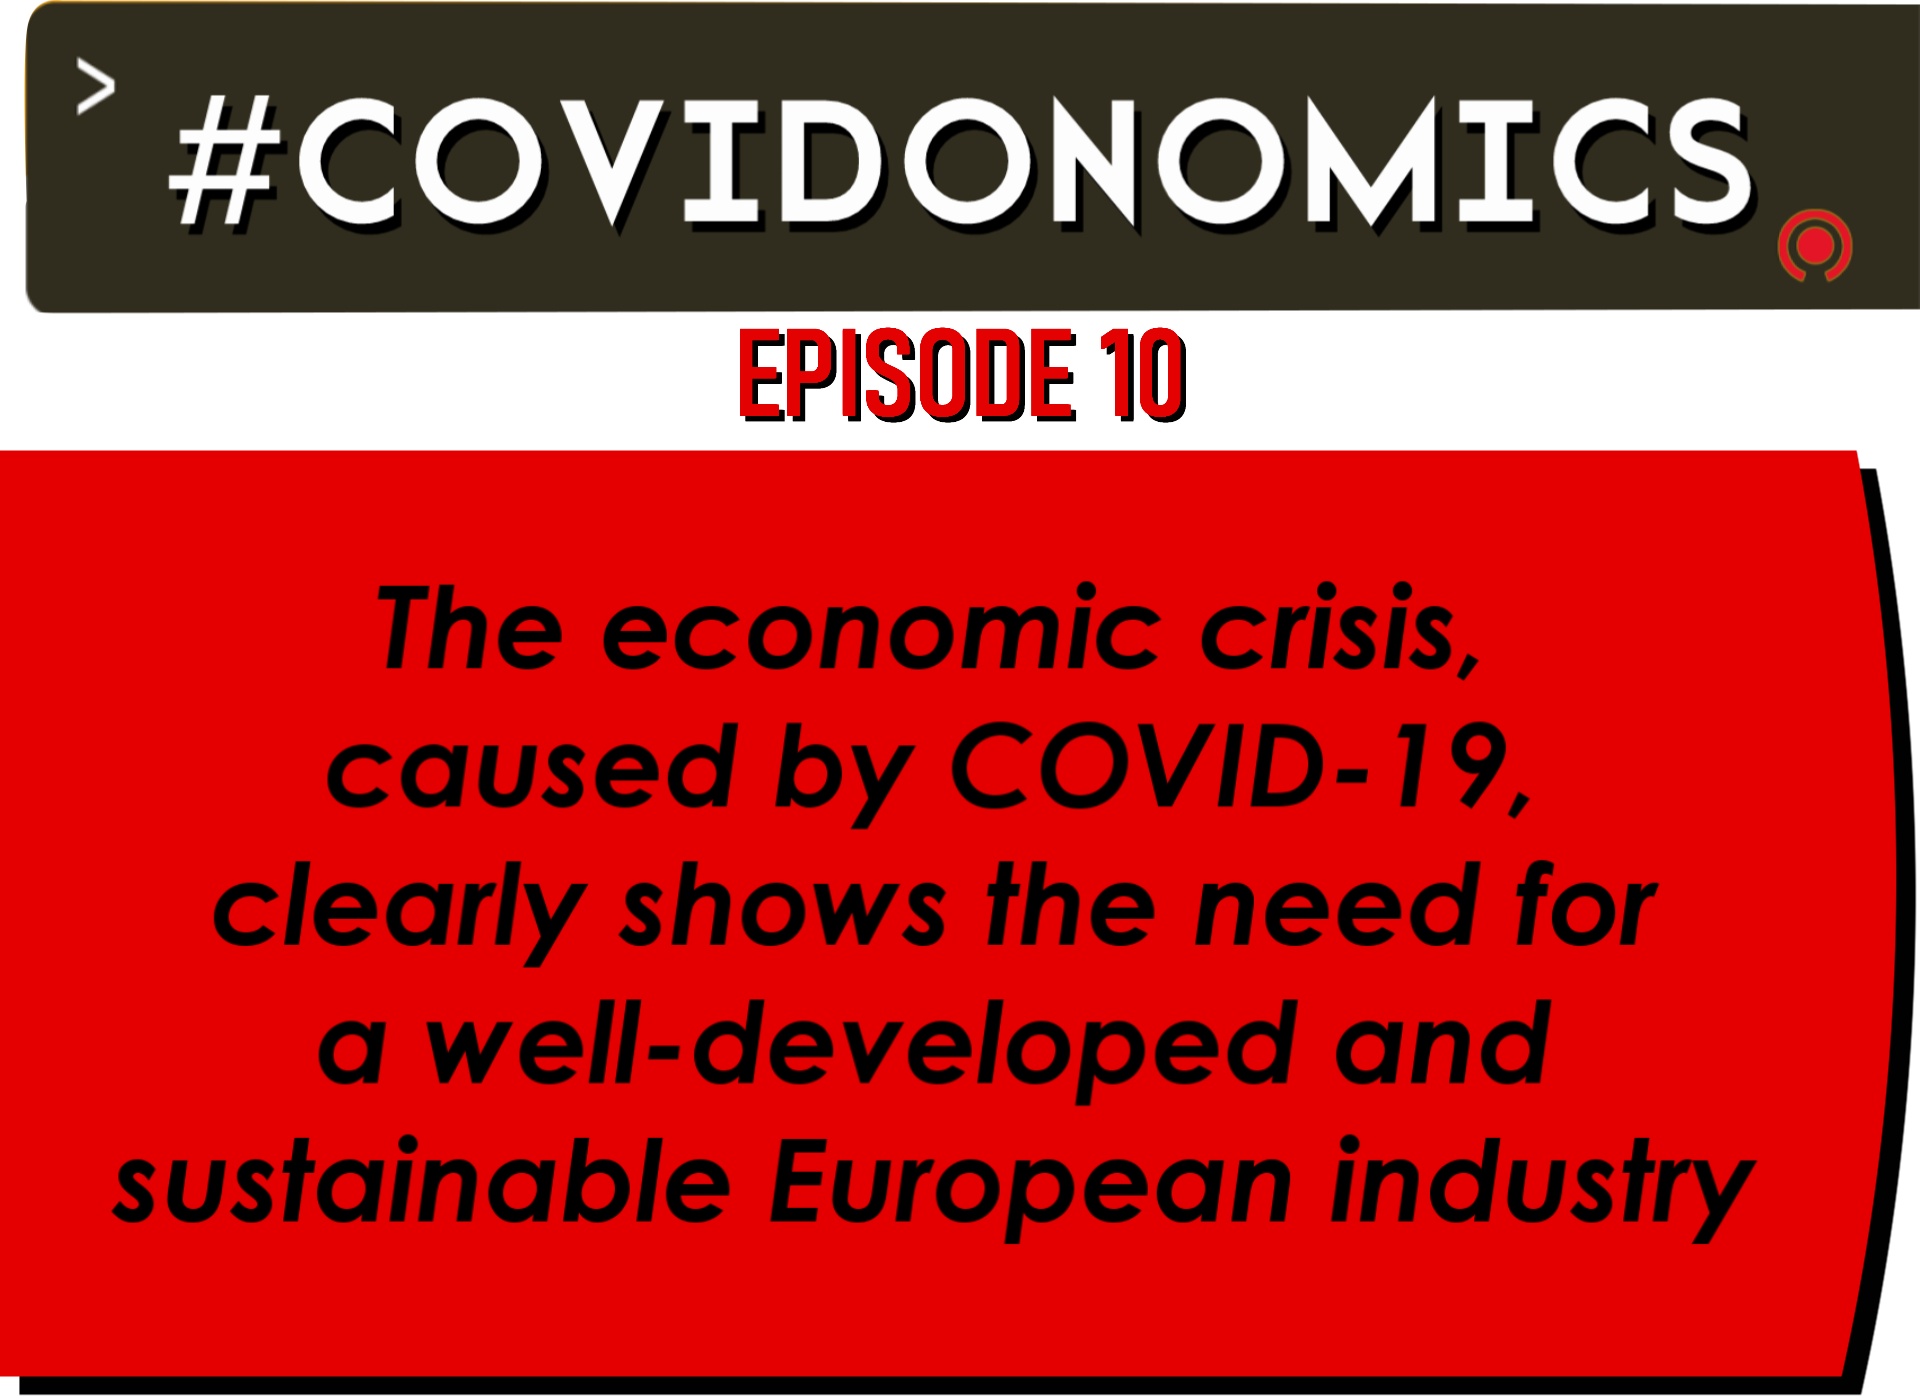 The economic crisis, caused by #Covid_19, clearly shows the need for a well-developed and sustainable European industry